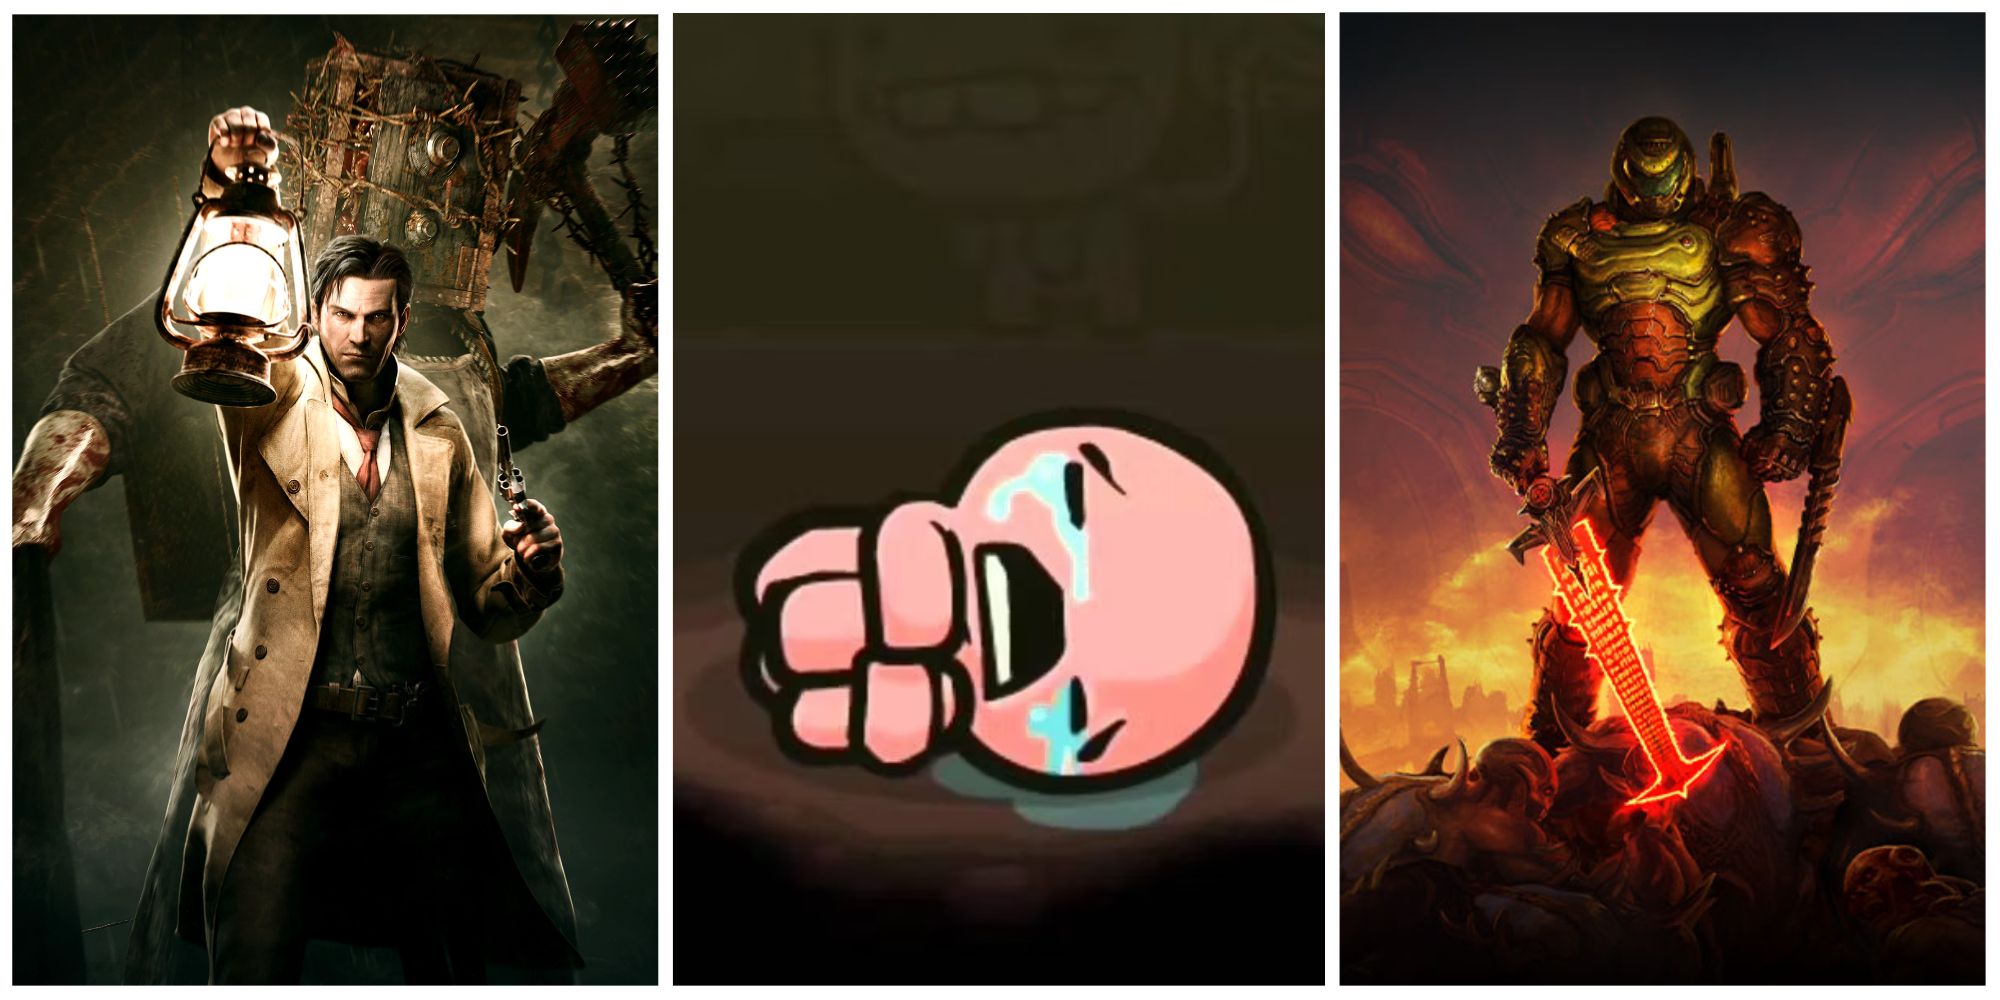 Split image featuring characters from The Evil Within, The Binding of Isaac, and Doom Eternal